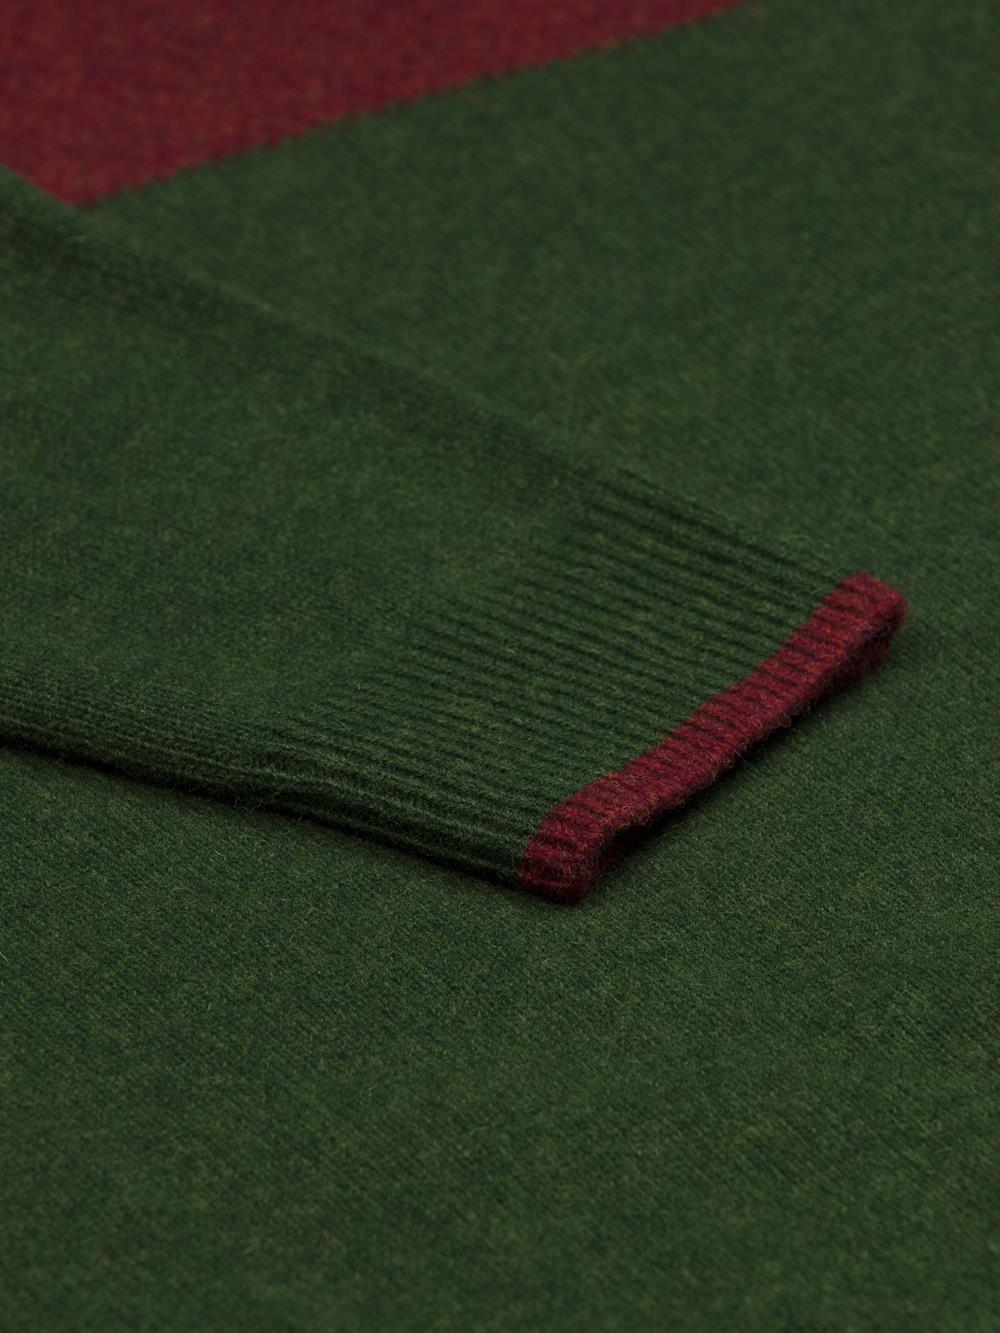 Boyd round neck in green lambswool